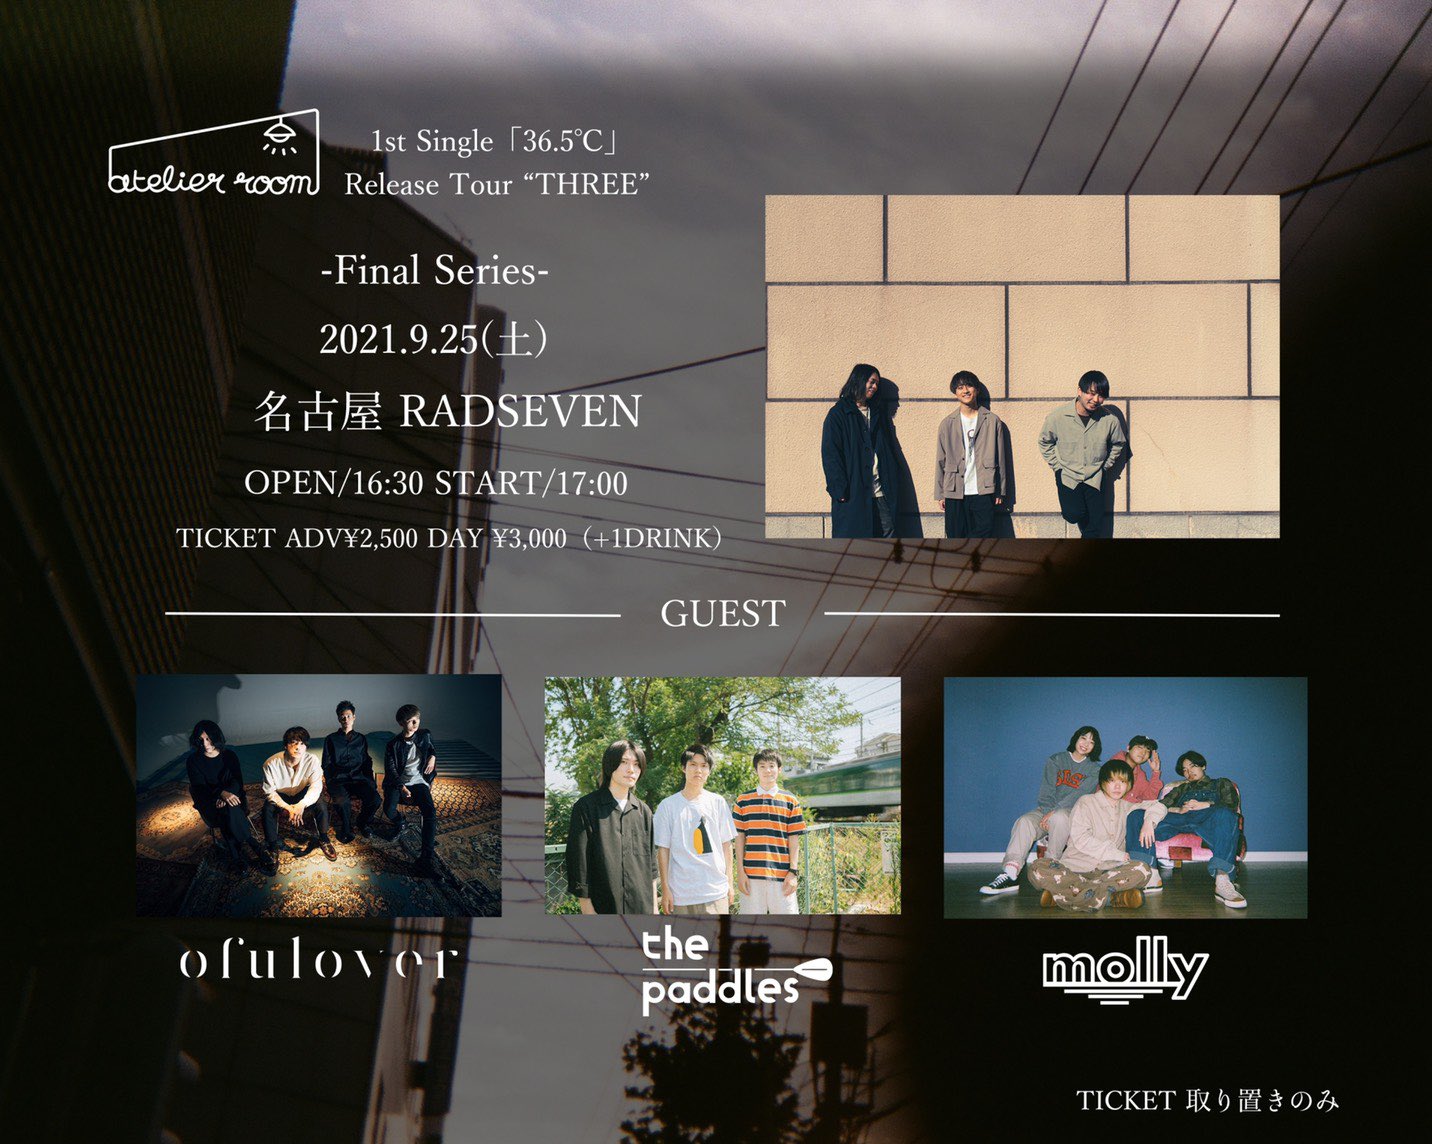 atelier room 1st Single 「36.5℃」Release Tour “THREE” Final Series 名古屋編